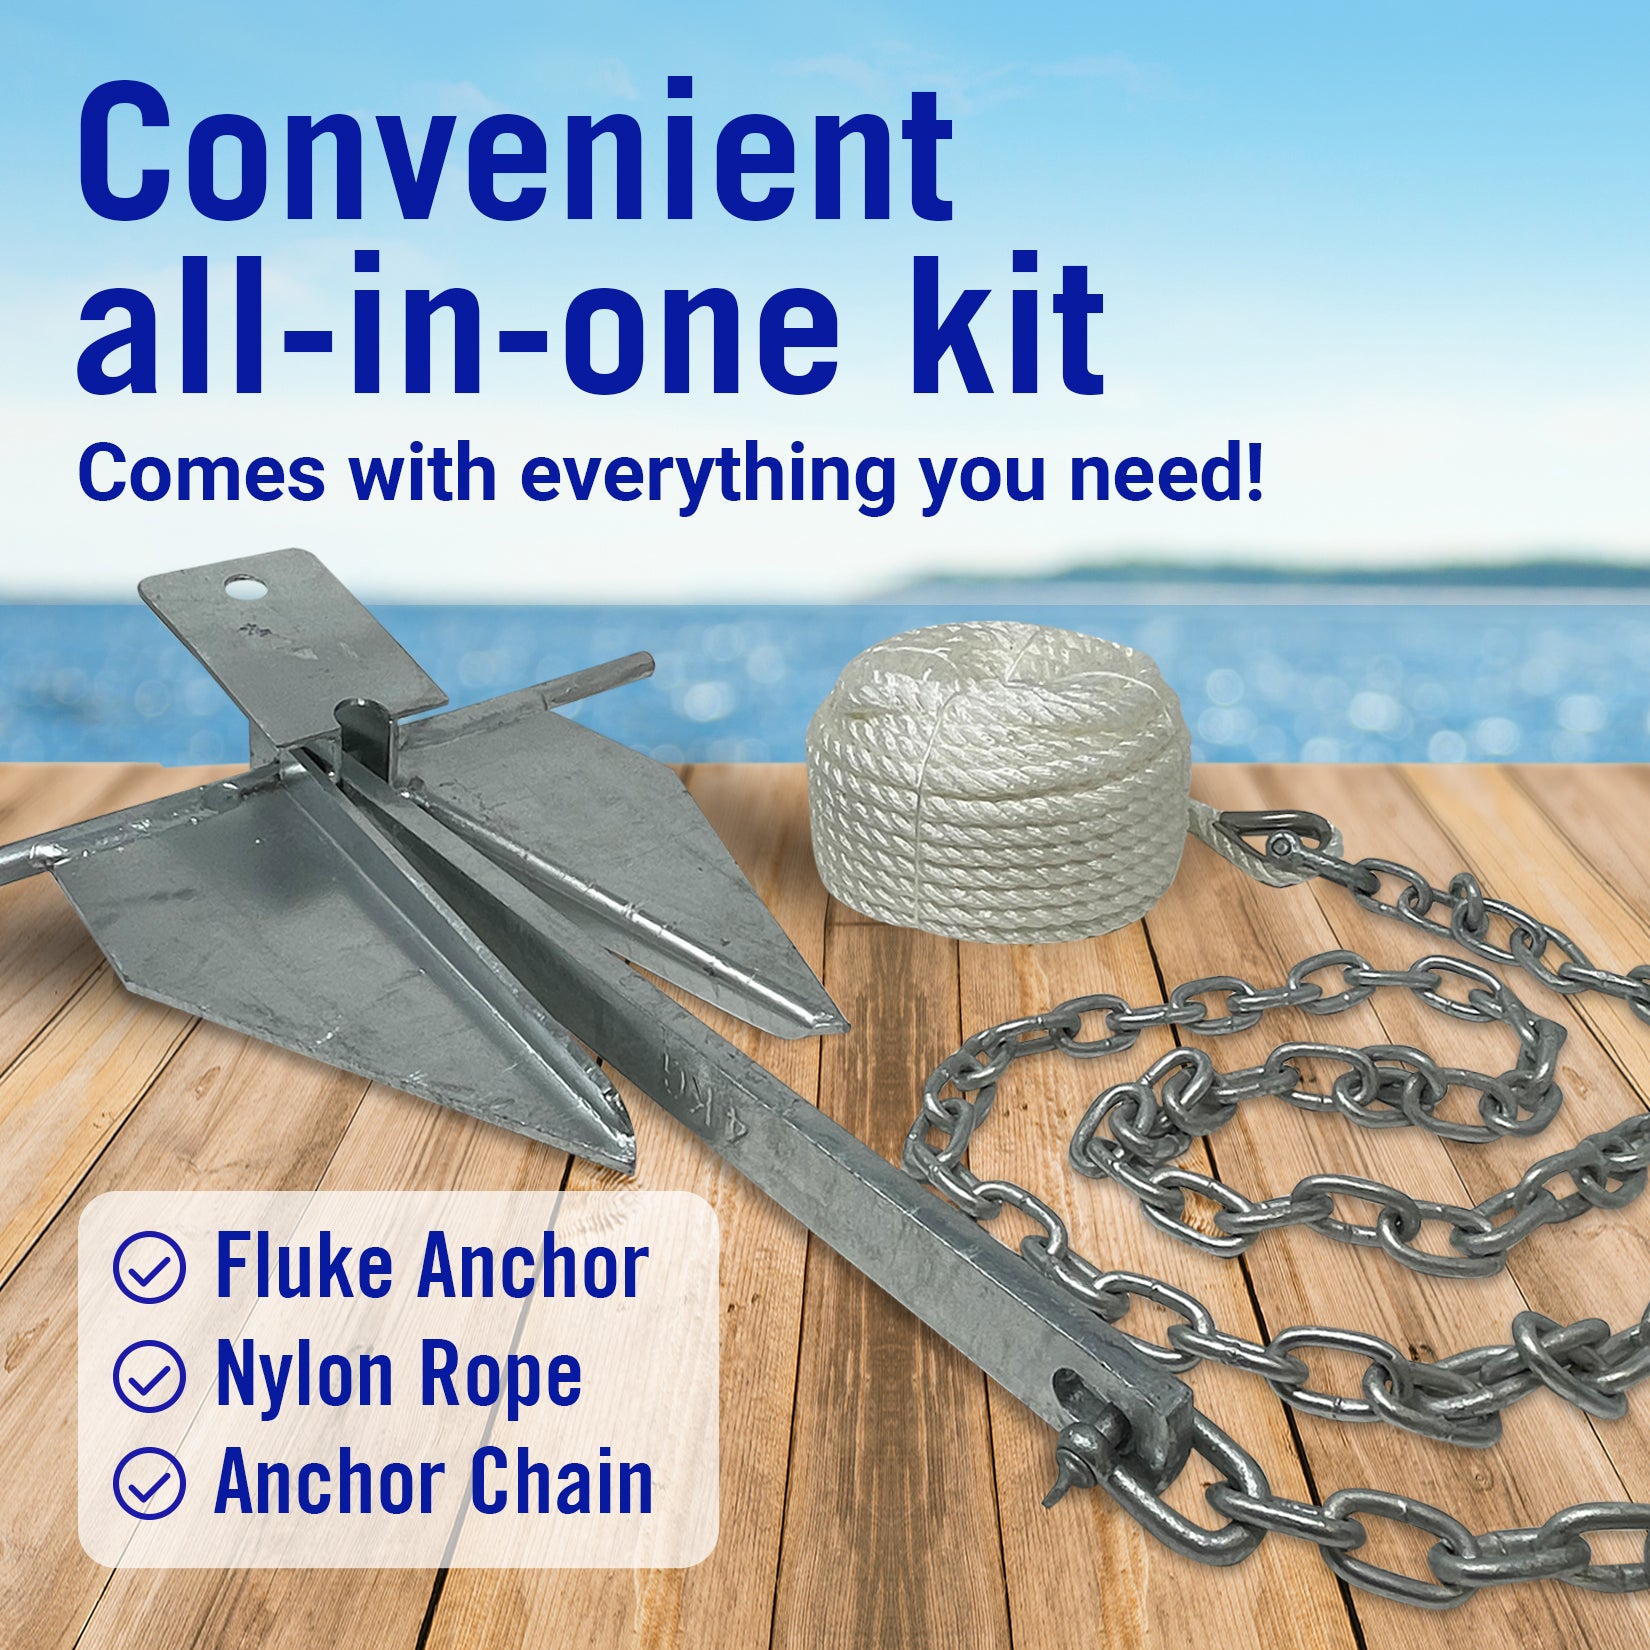 Better Boat 13lb Heavy Boat Anchor Kit Fluke Anchor with Anchor Chain and Boat Anchor Rope Set for 20' - 32' Foot Including Boat Anchors for 21' and